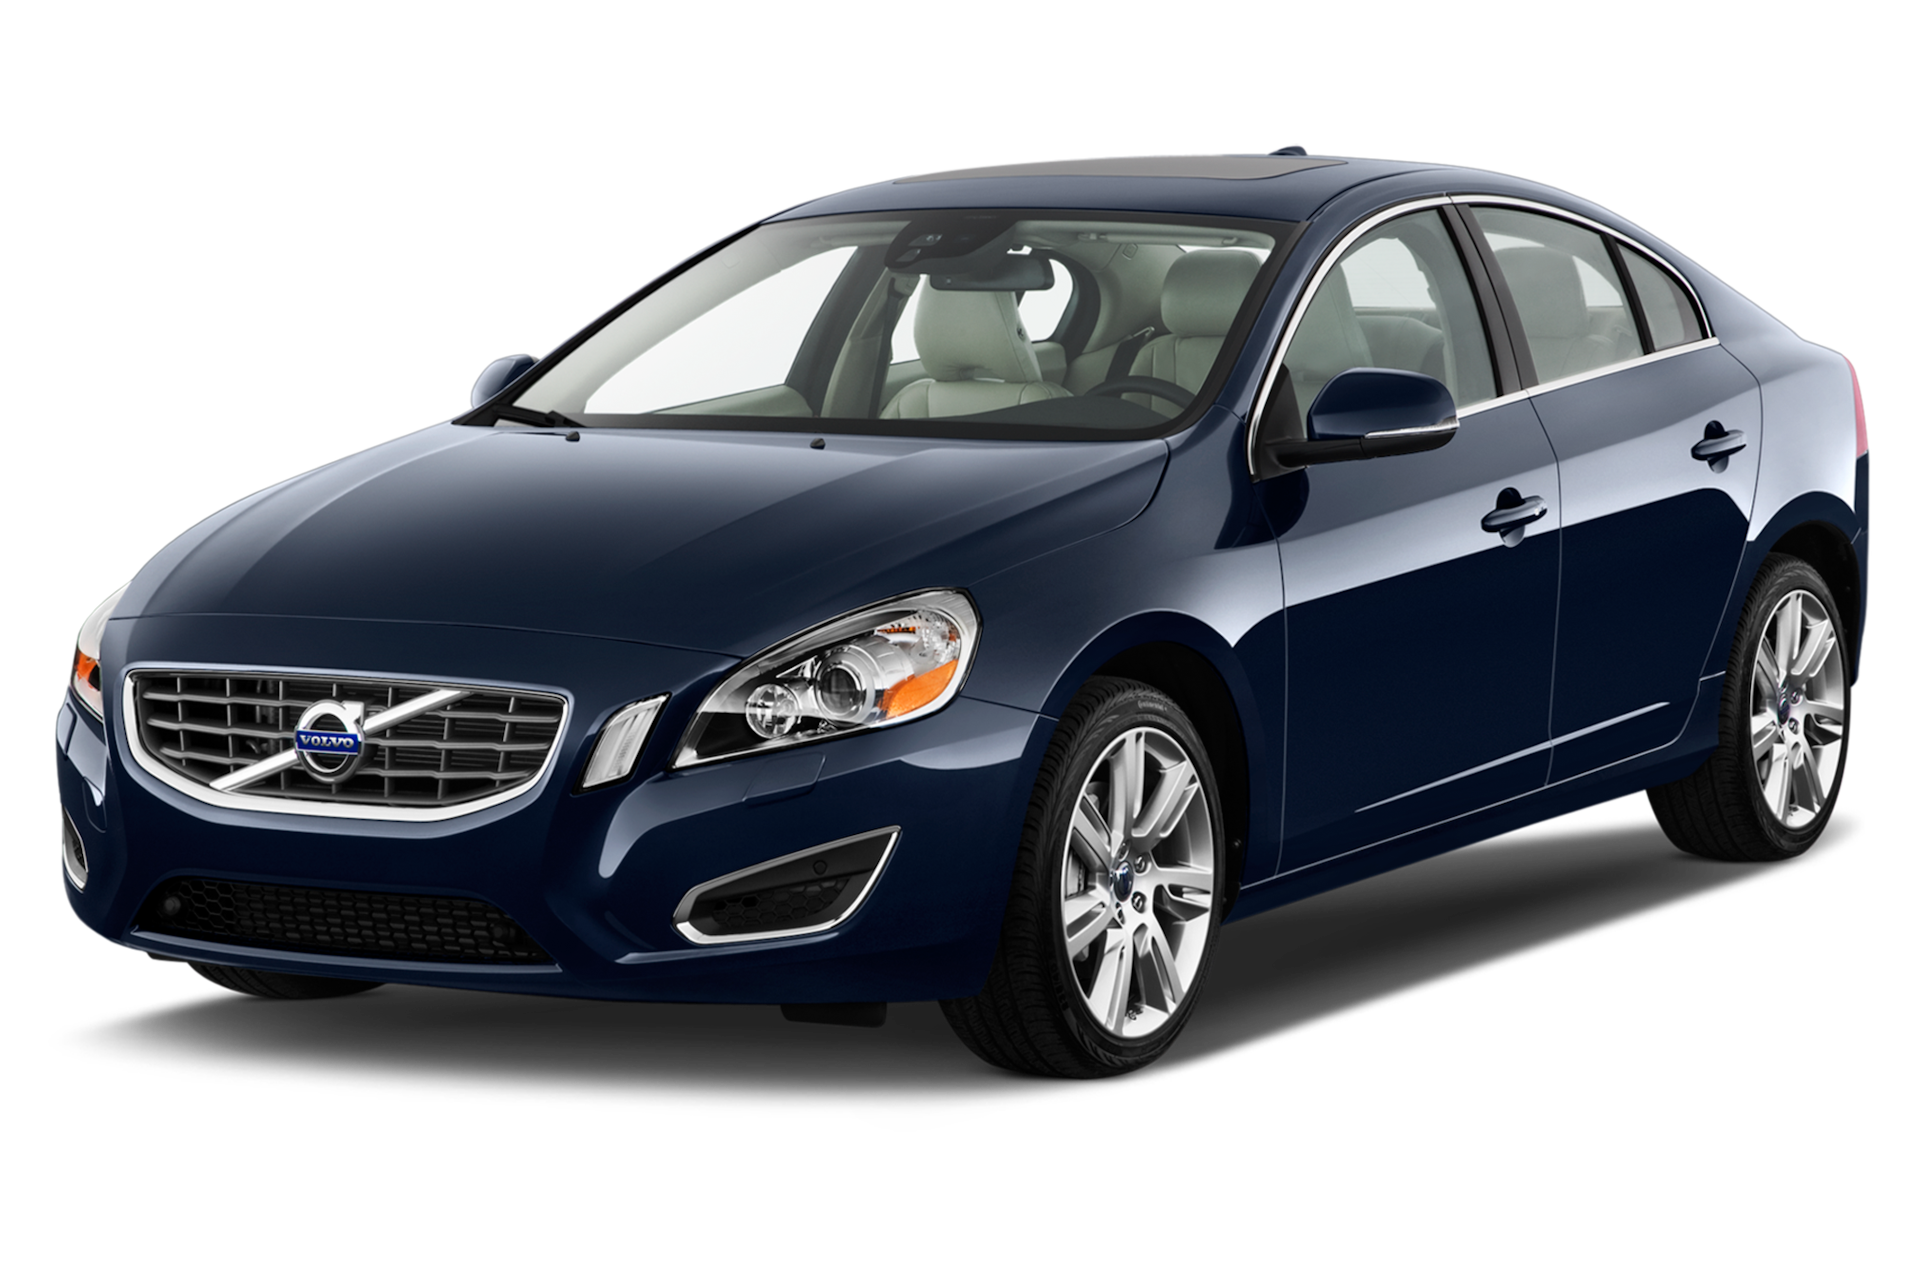 2013 Volvo S60 Prices, Reviews, and Photos - MotorTrend